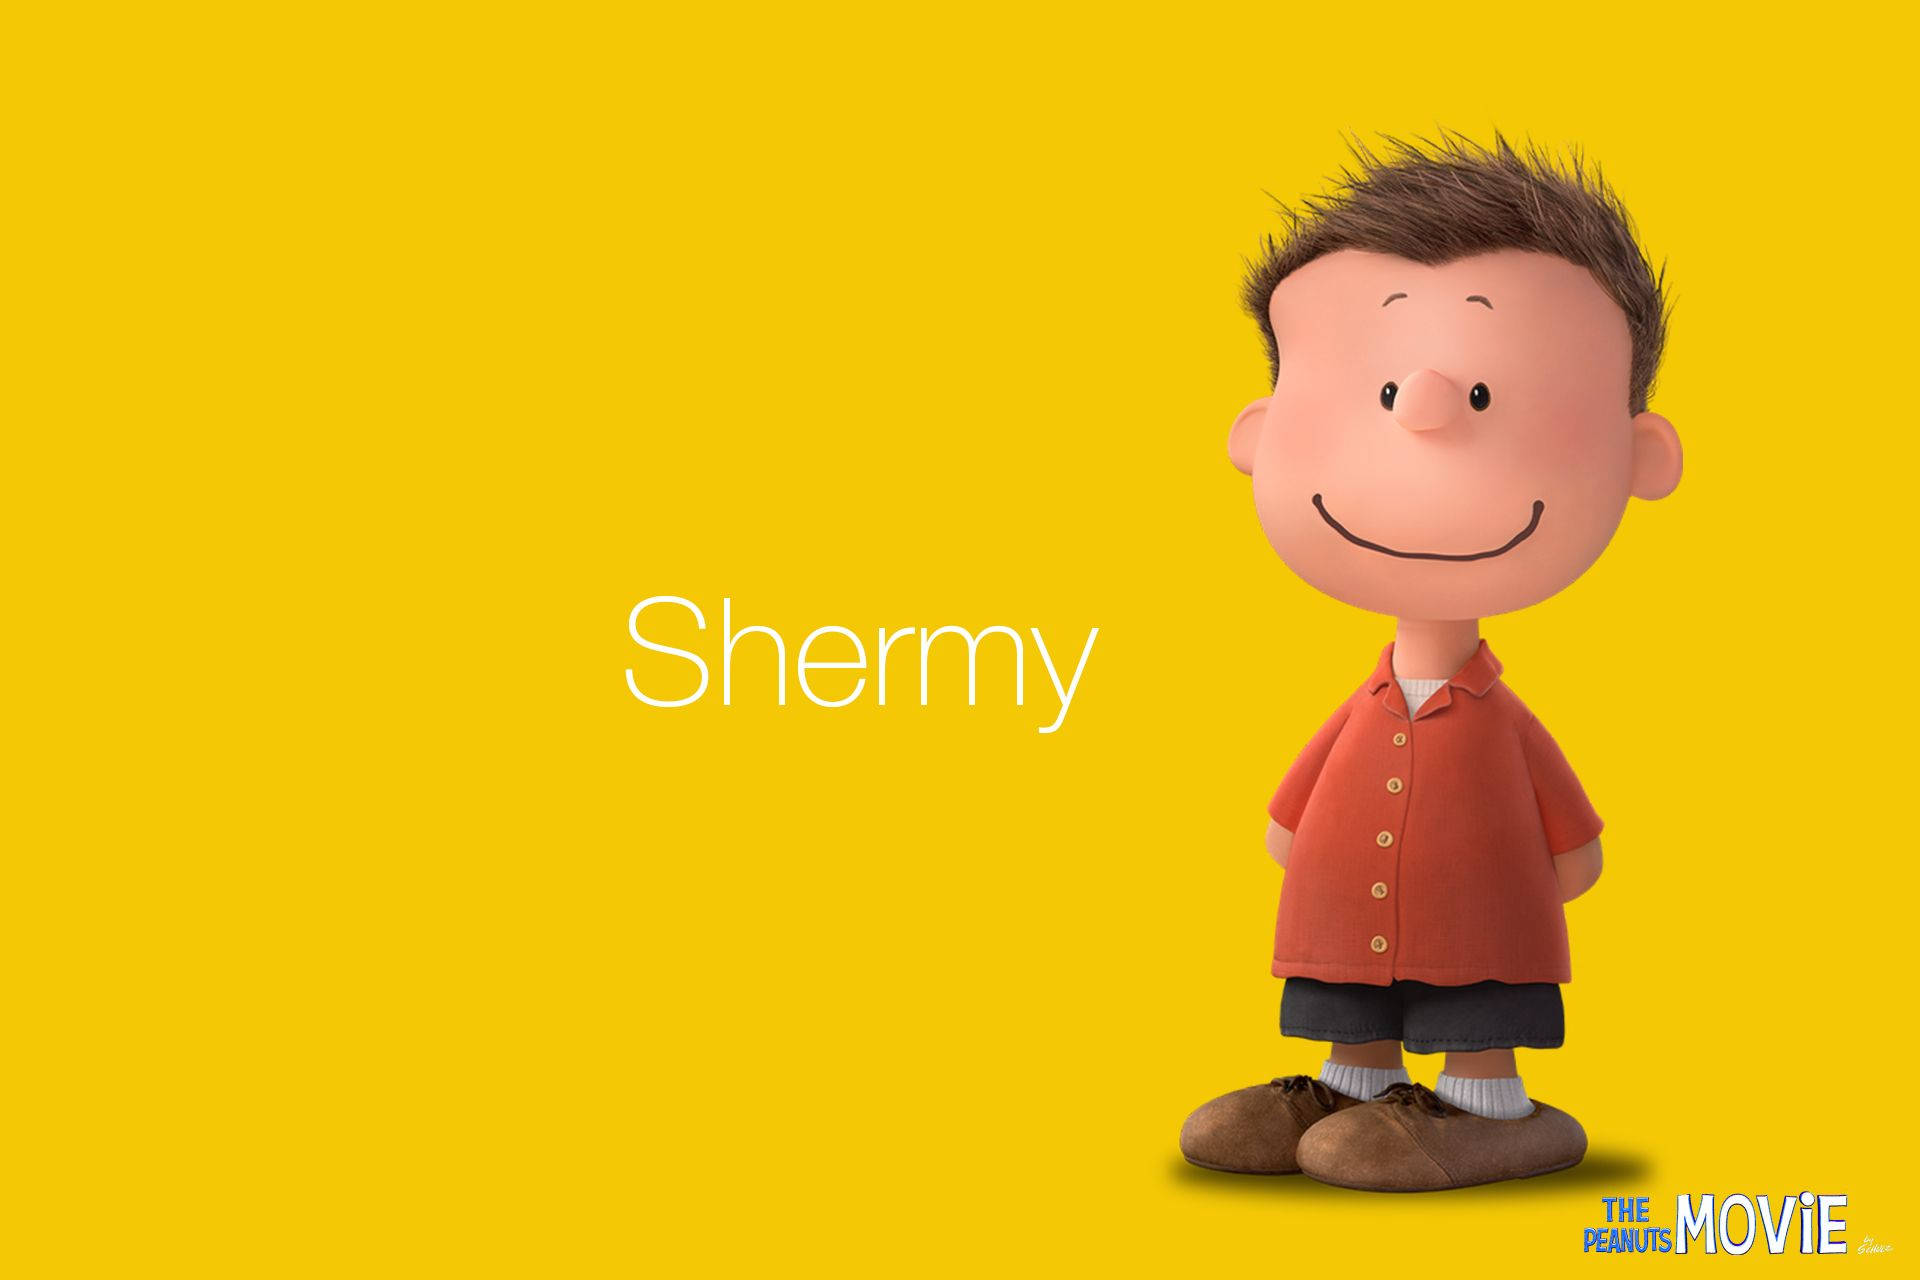 Download The Peanuts Movie Shermy Wallpaper 